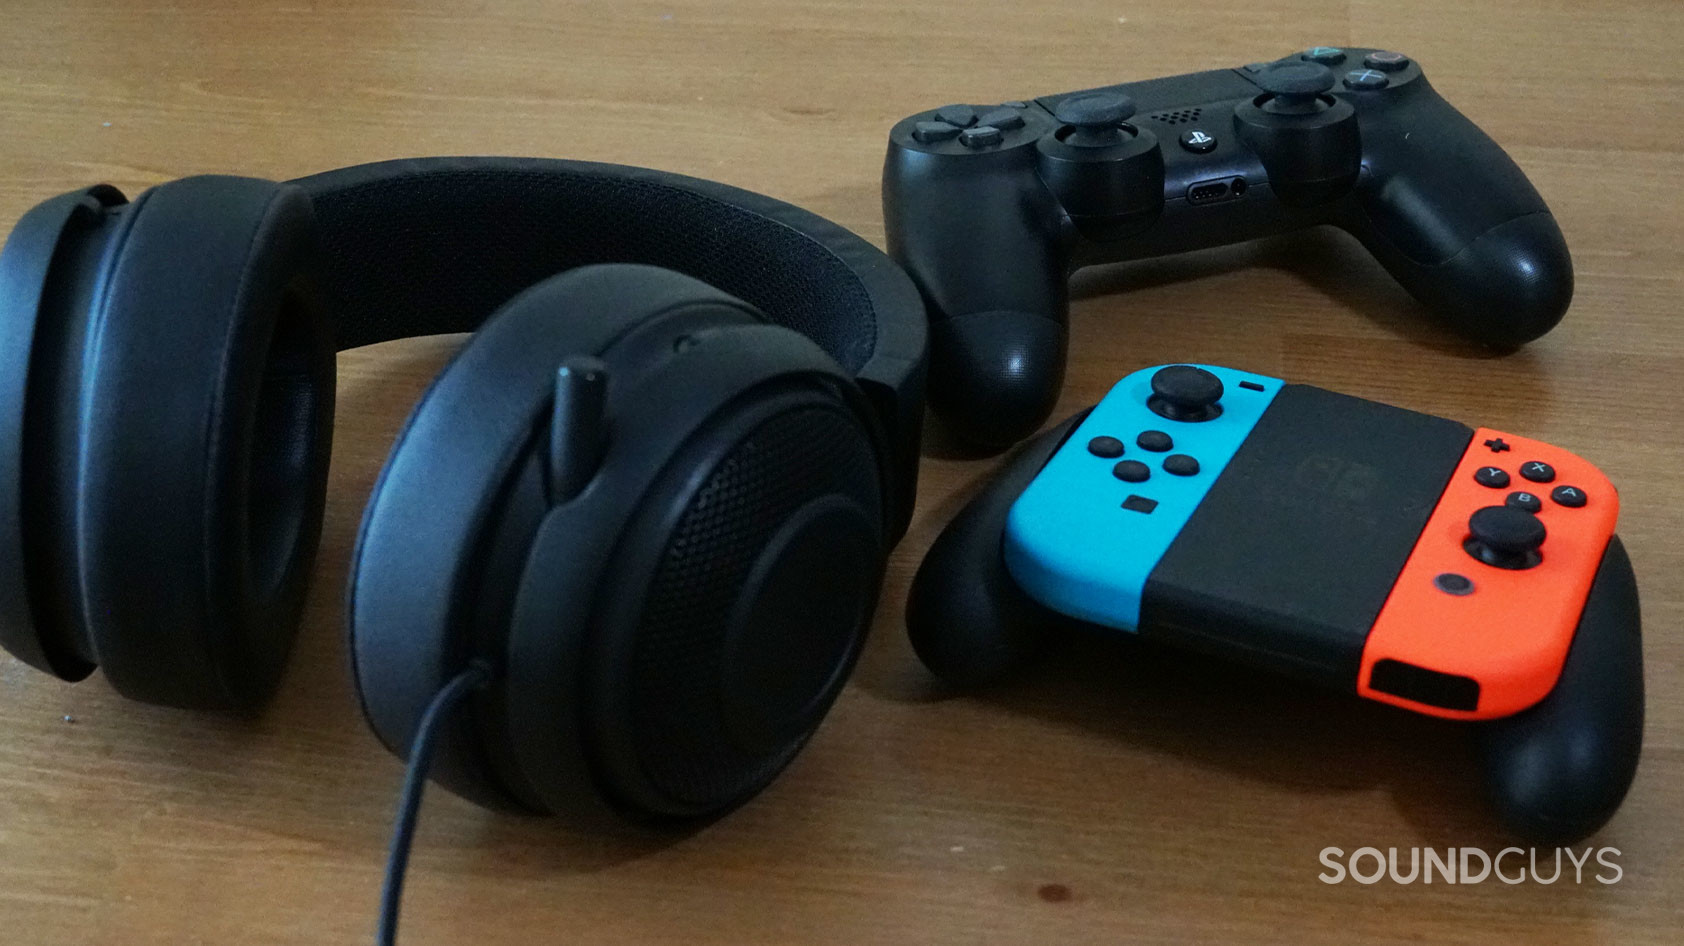 The Razer Kraken V2 Pro gaming headset next to a Nintendo Switch and PlayStation 4 controller.